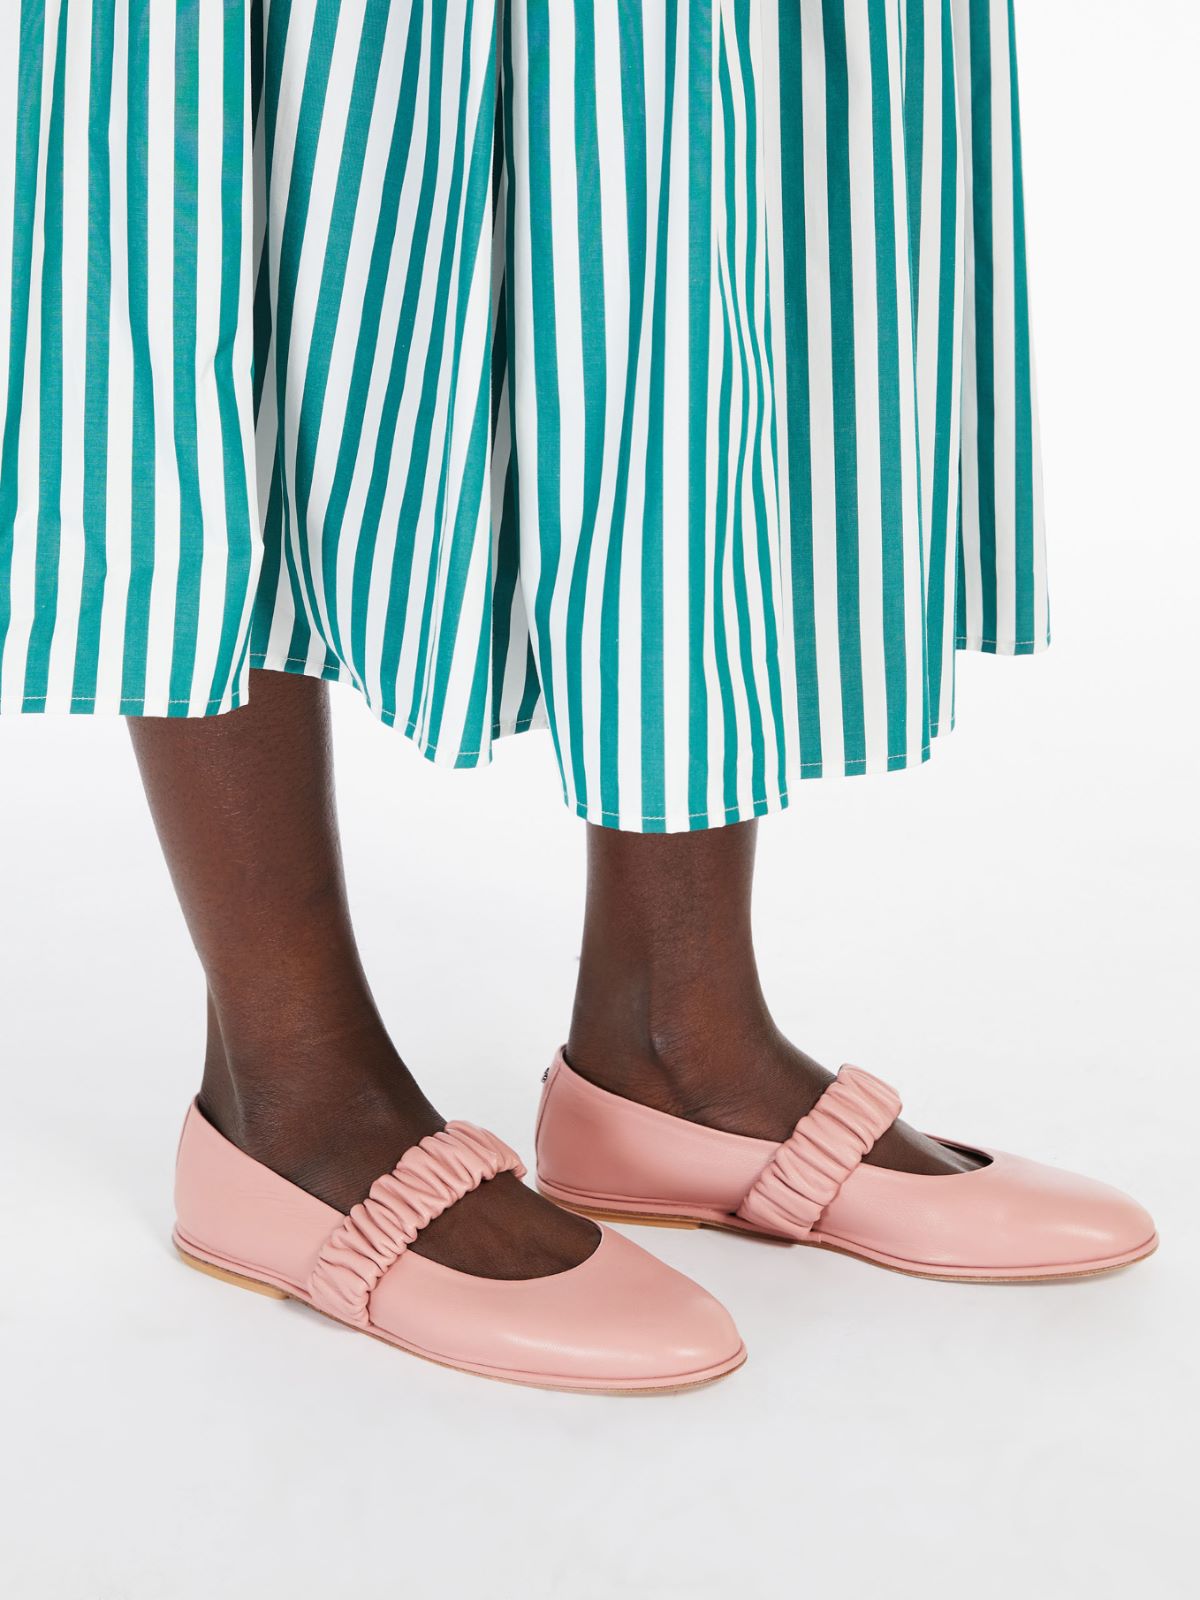 Ballet flats in nappa leather - ANTIQUE ROSE - Weekend Max Mara - 8